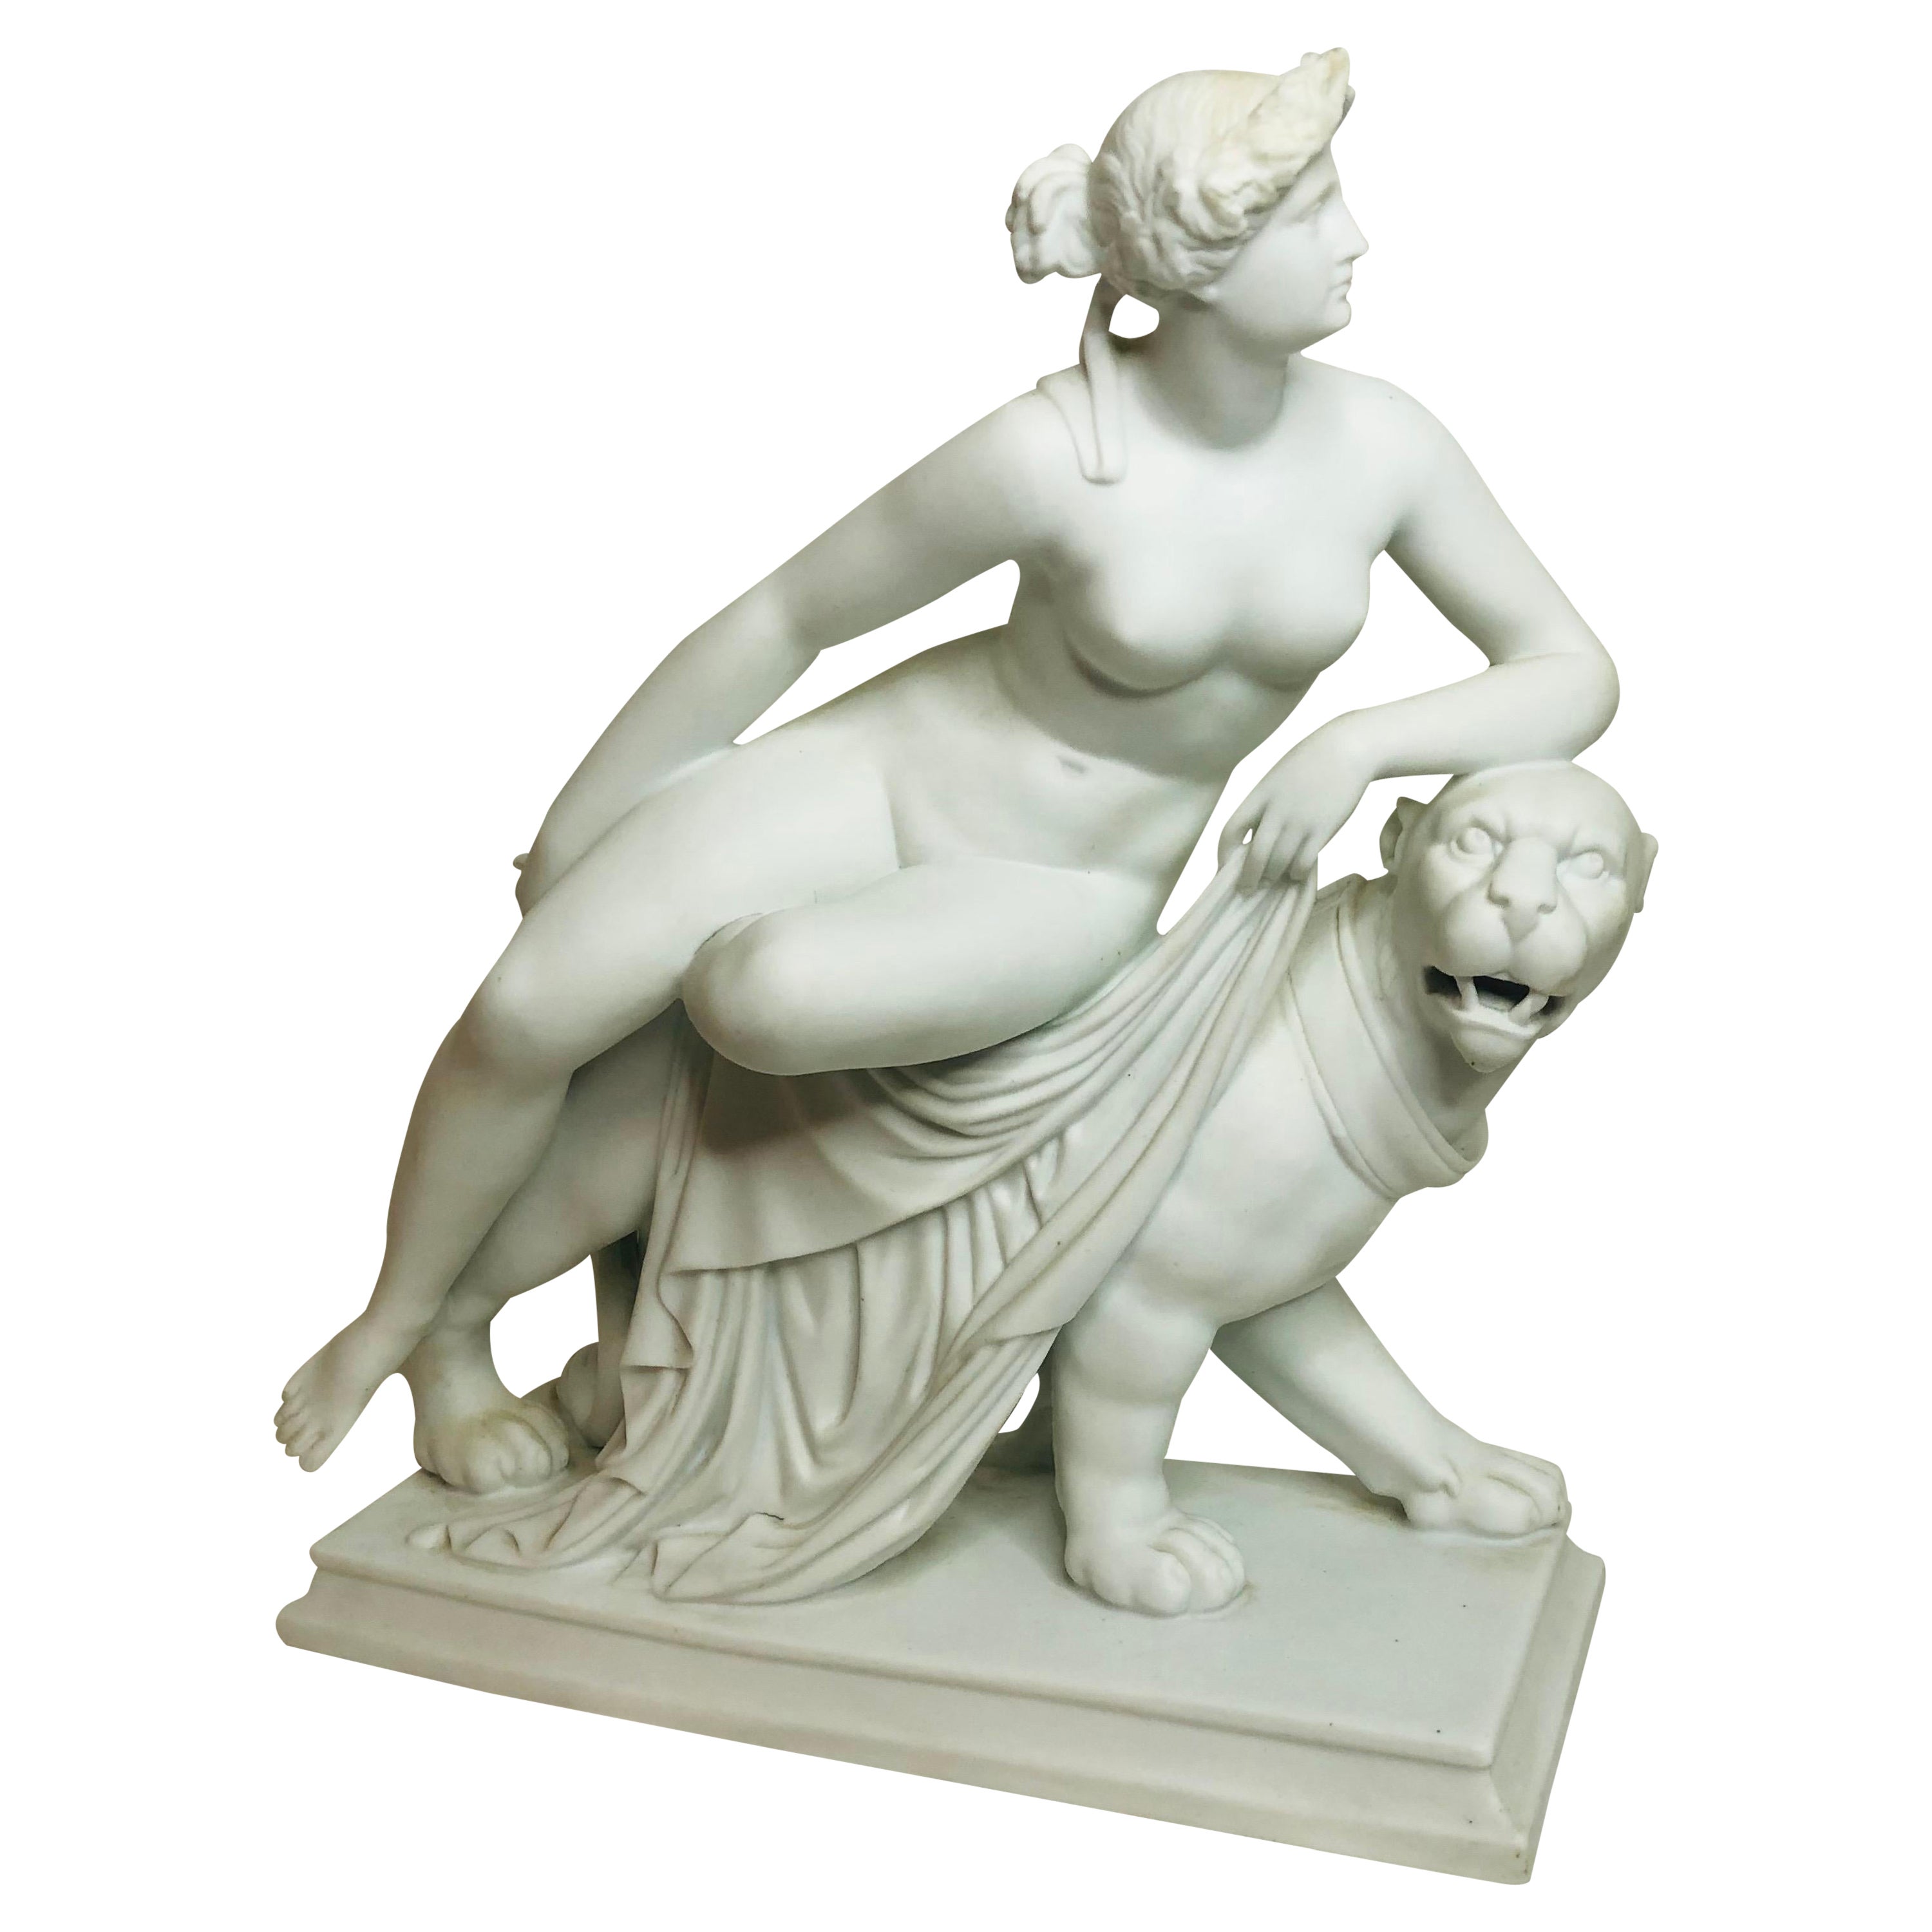 English Parian Figurine of a Nude Figure of Adriadne Riding on Top of a Panther